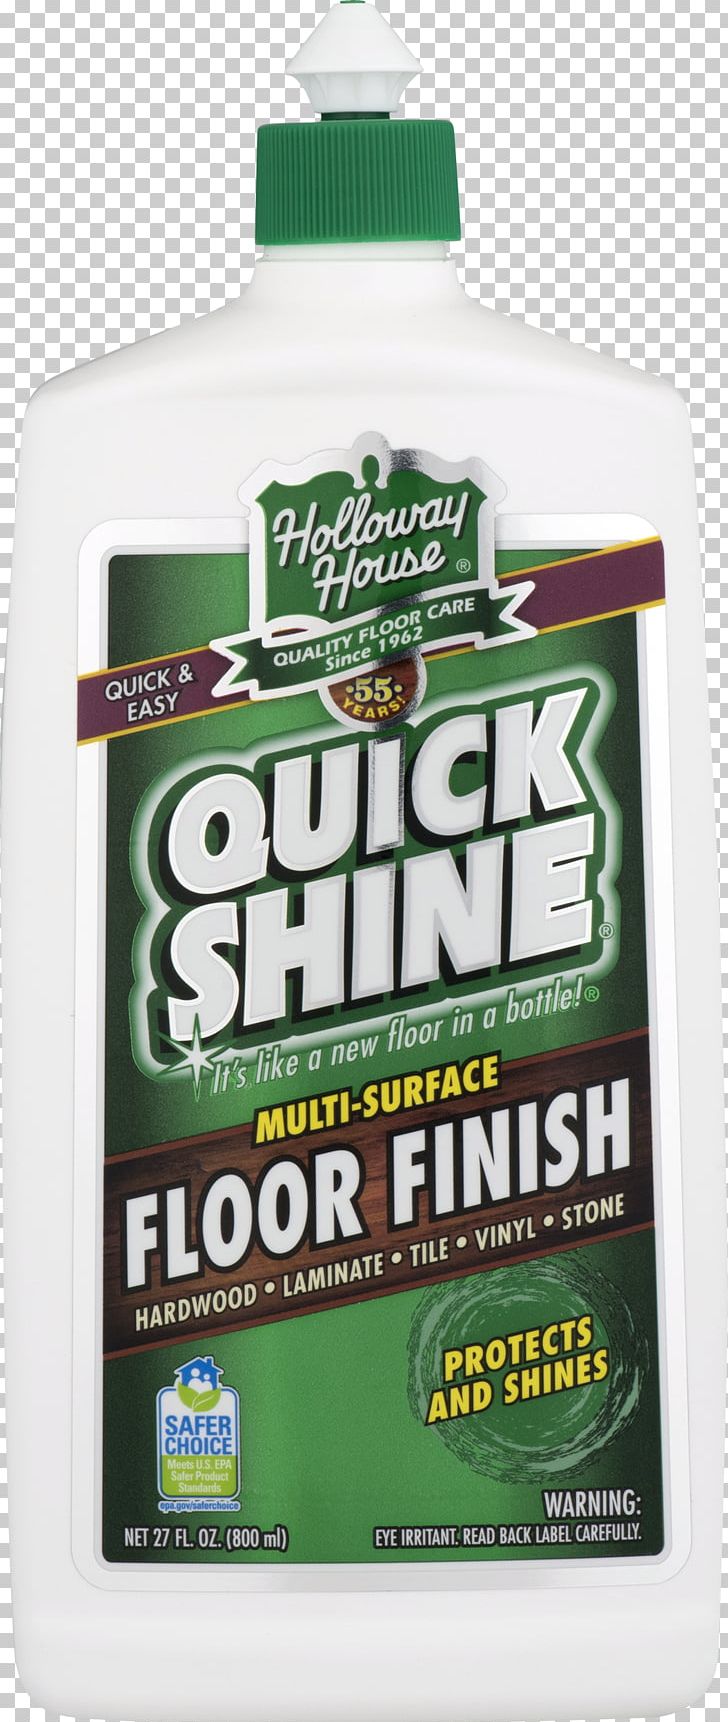 Quick Shine Concentrated Floor Cleaner Quick Shine Floor Finish 1890ml Holloway House Quick Shine 27-Ounce Floor Finish Bottle PNG, Clipart, Adhesive, Automotive Fluid, Bottle, Car, Floor Free PNG Download